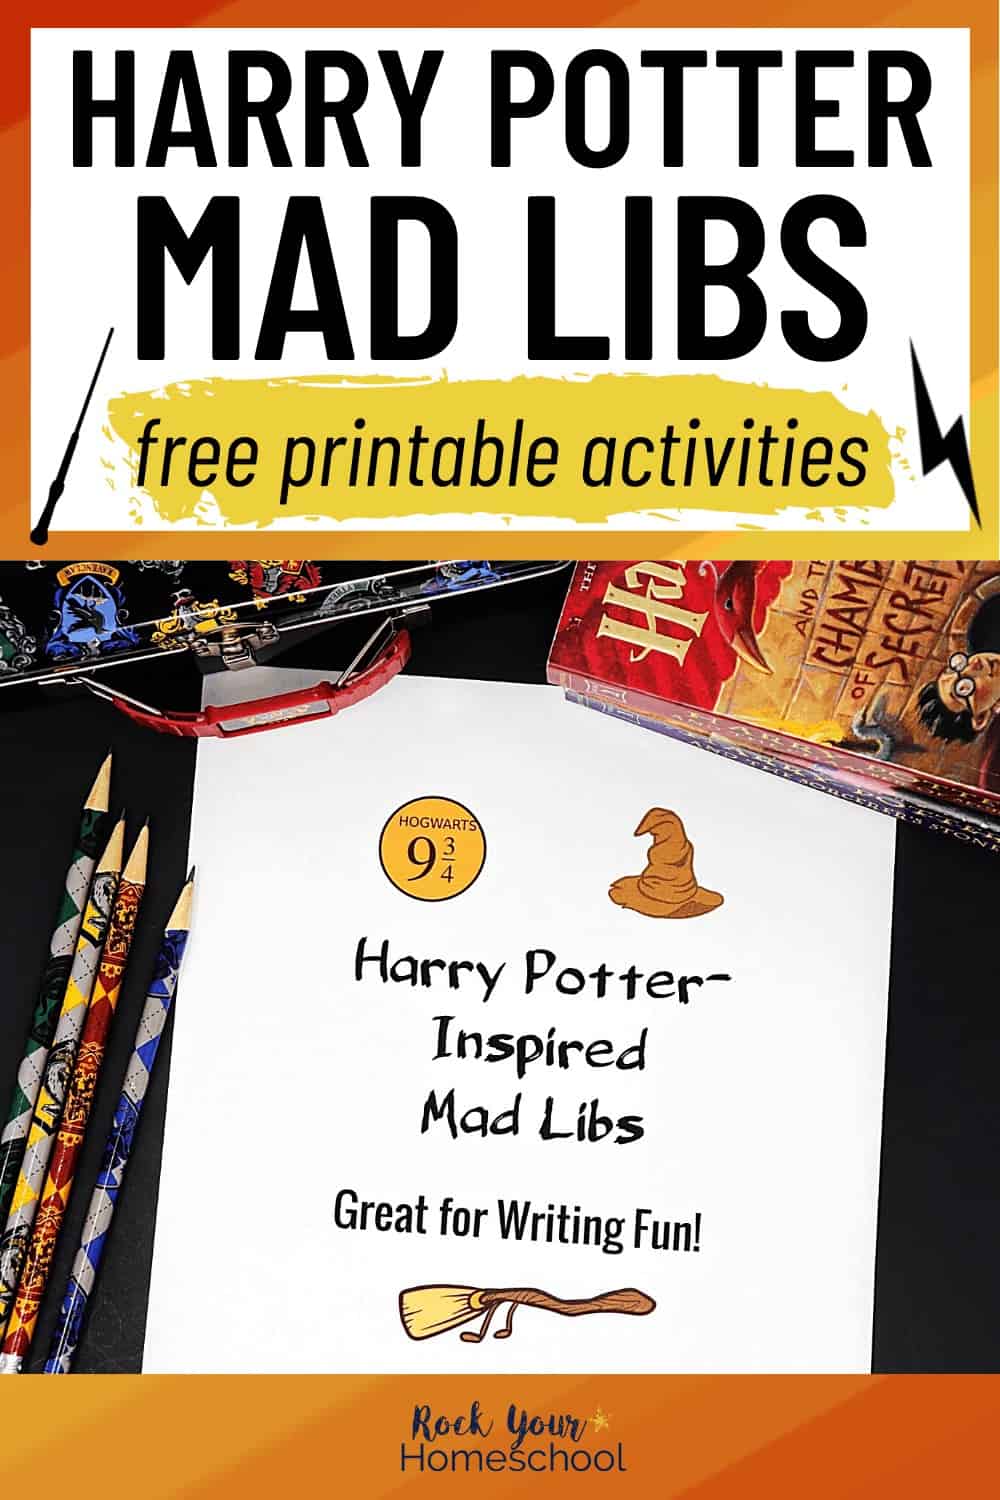 Free Harry Potter-Inspired Mad Libs for Writing Fun Activities